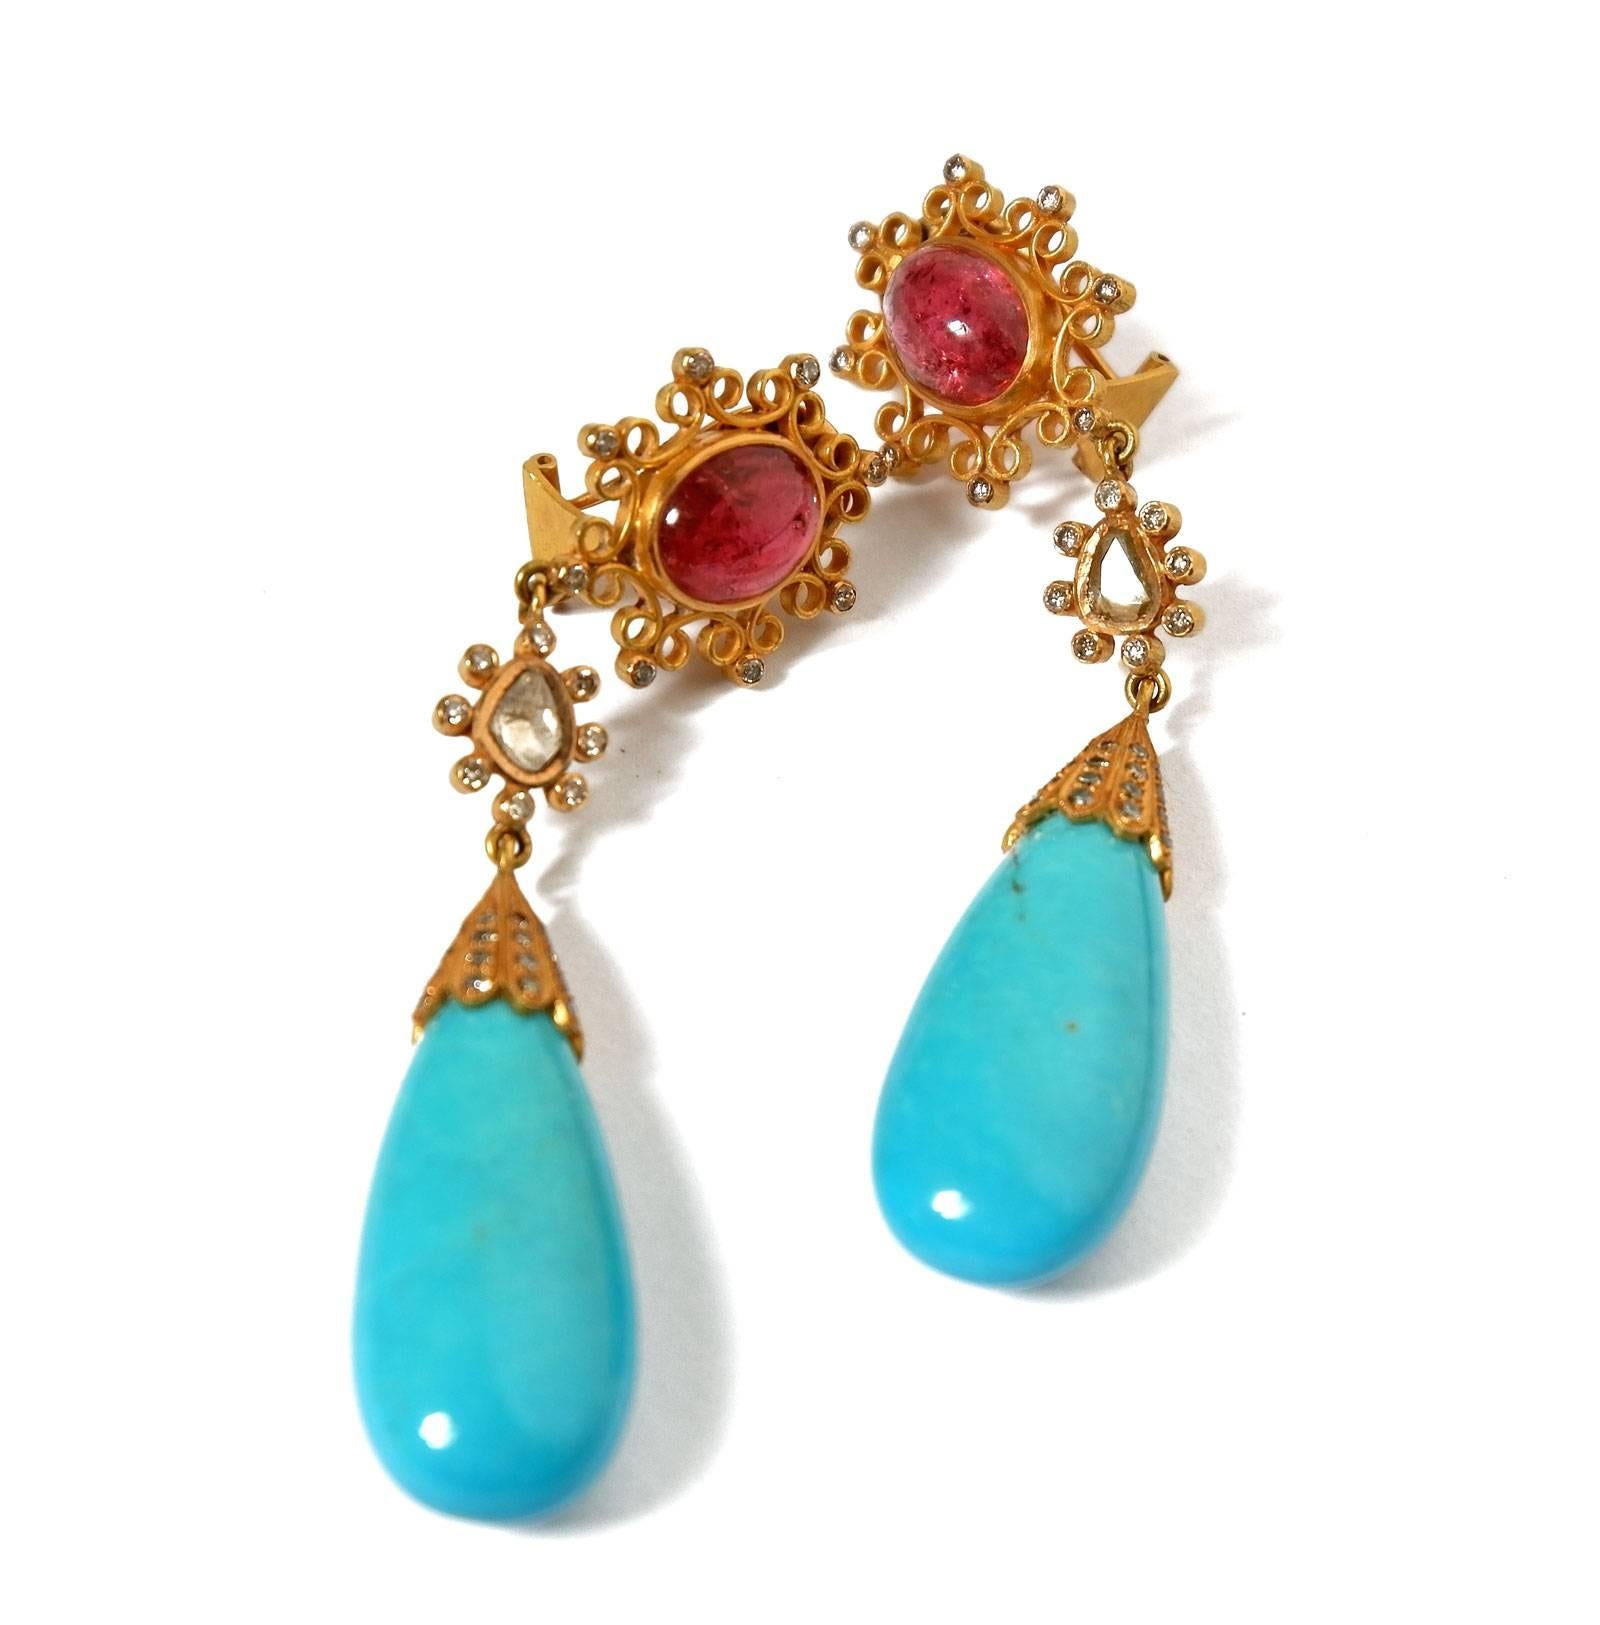 Hand crafted spectacular diamond, tourmaline and turquoise earrings. 18 karat gold. The cabochon rubellite tourmalines are surrounded by intricate diamond set gold scroll work. Two foiled backed flat cut diamonds surrounded by smaller diamonds. Two